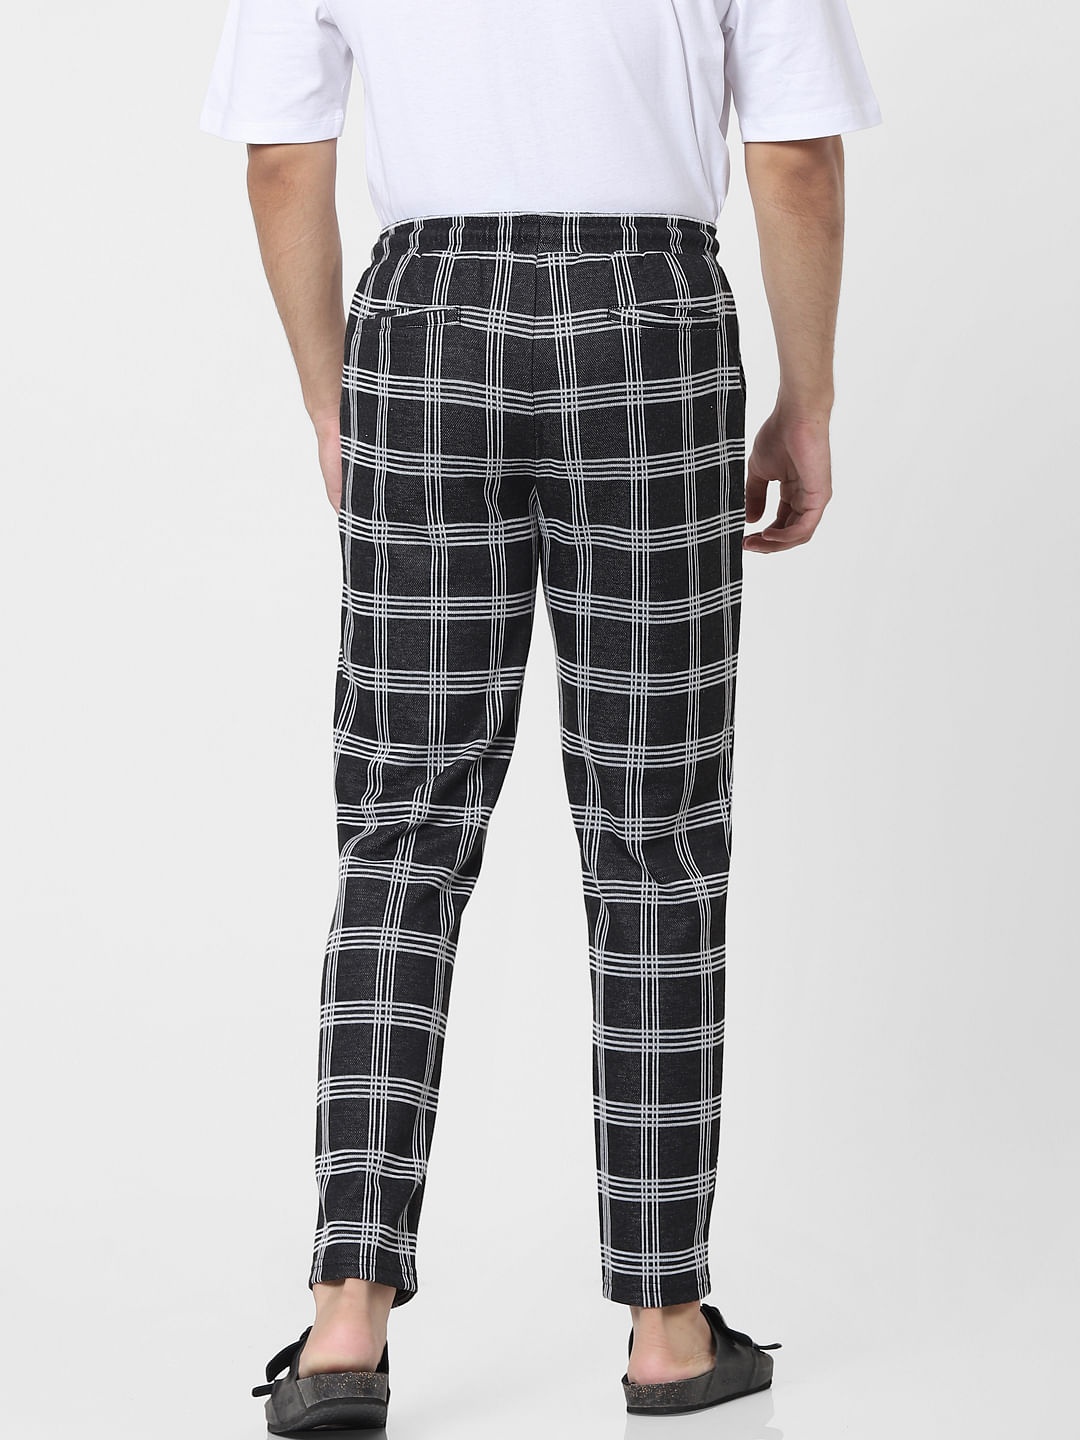 ASOS DESIGN super skinny wool mix suit pants in black and charcoal  windowpane plaid  ASOS